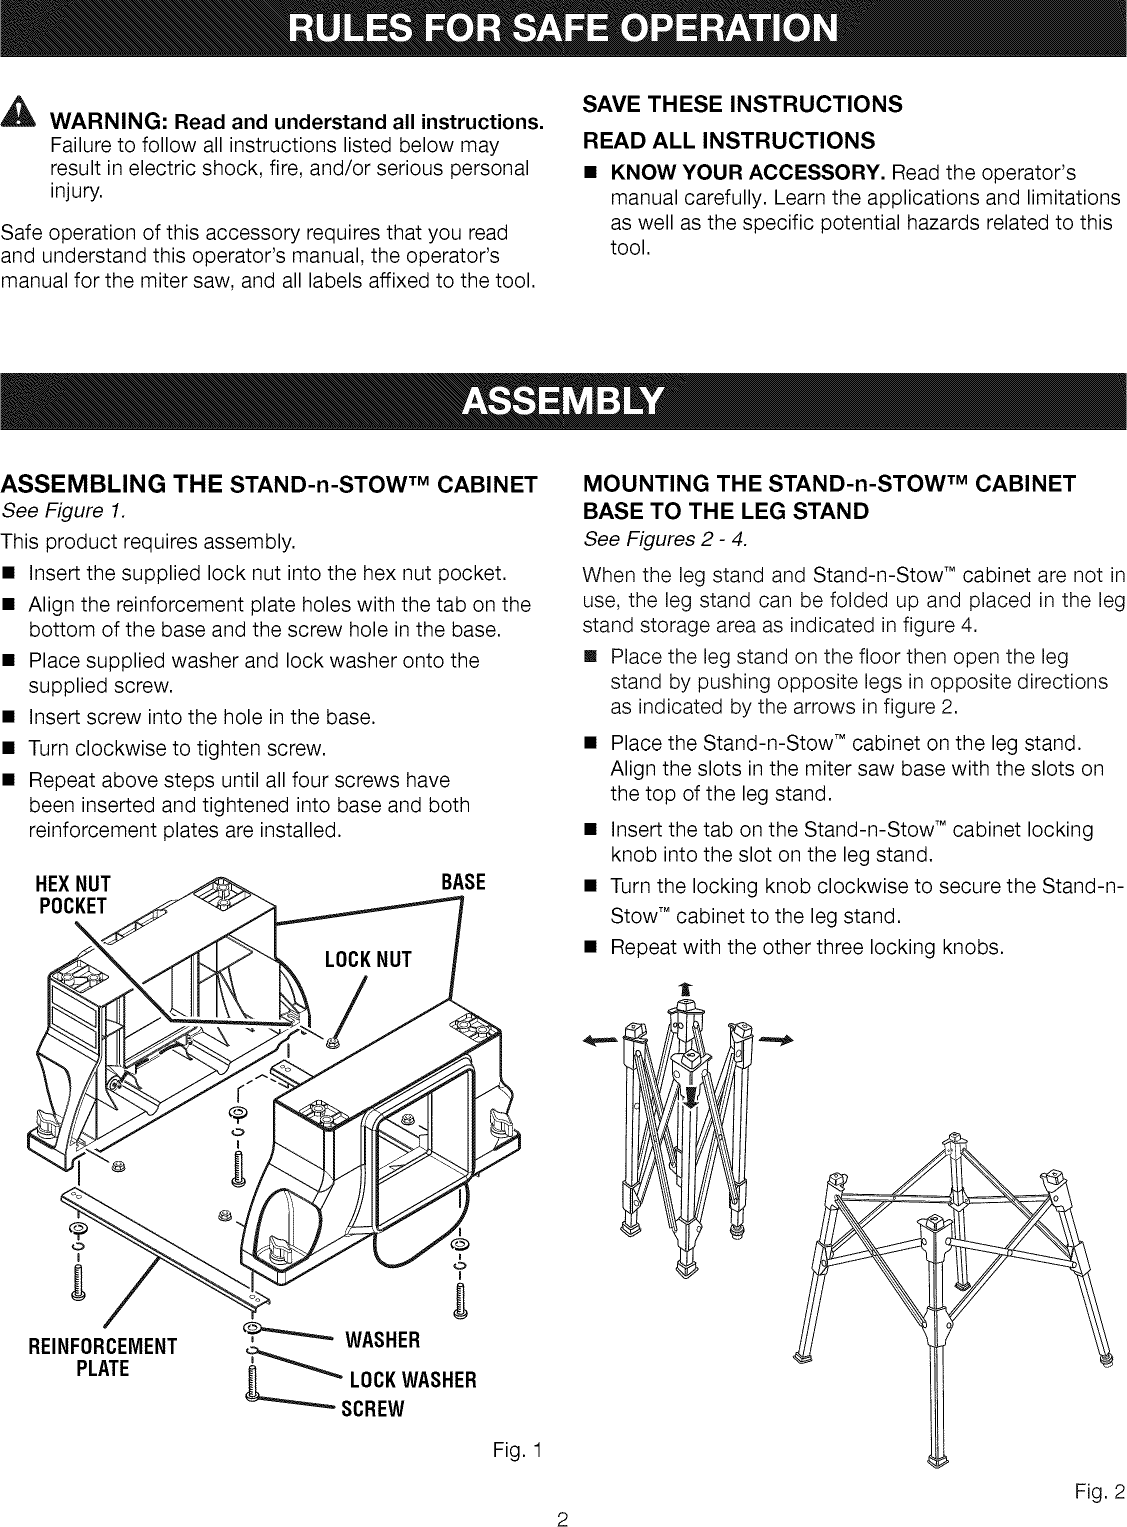 Page 2 of 6 - Craftsman 315223400 User Manual  STAND-N-STOW CABINET - Manuals And Guides L0905113